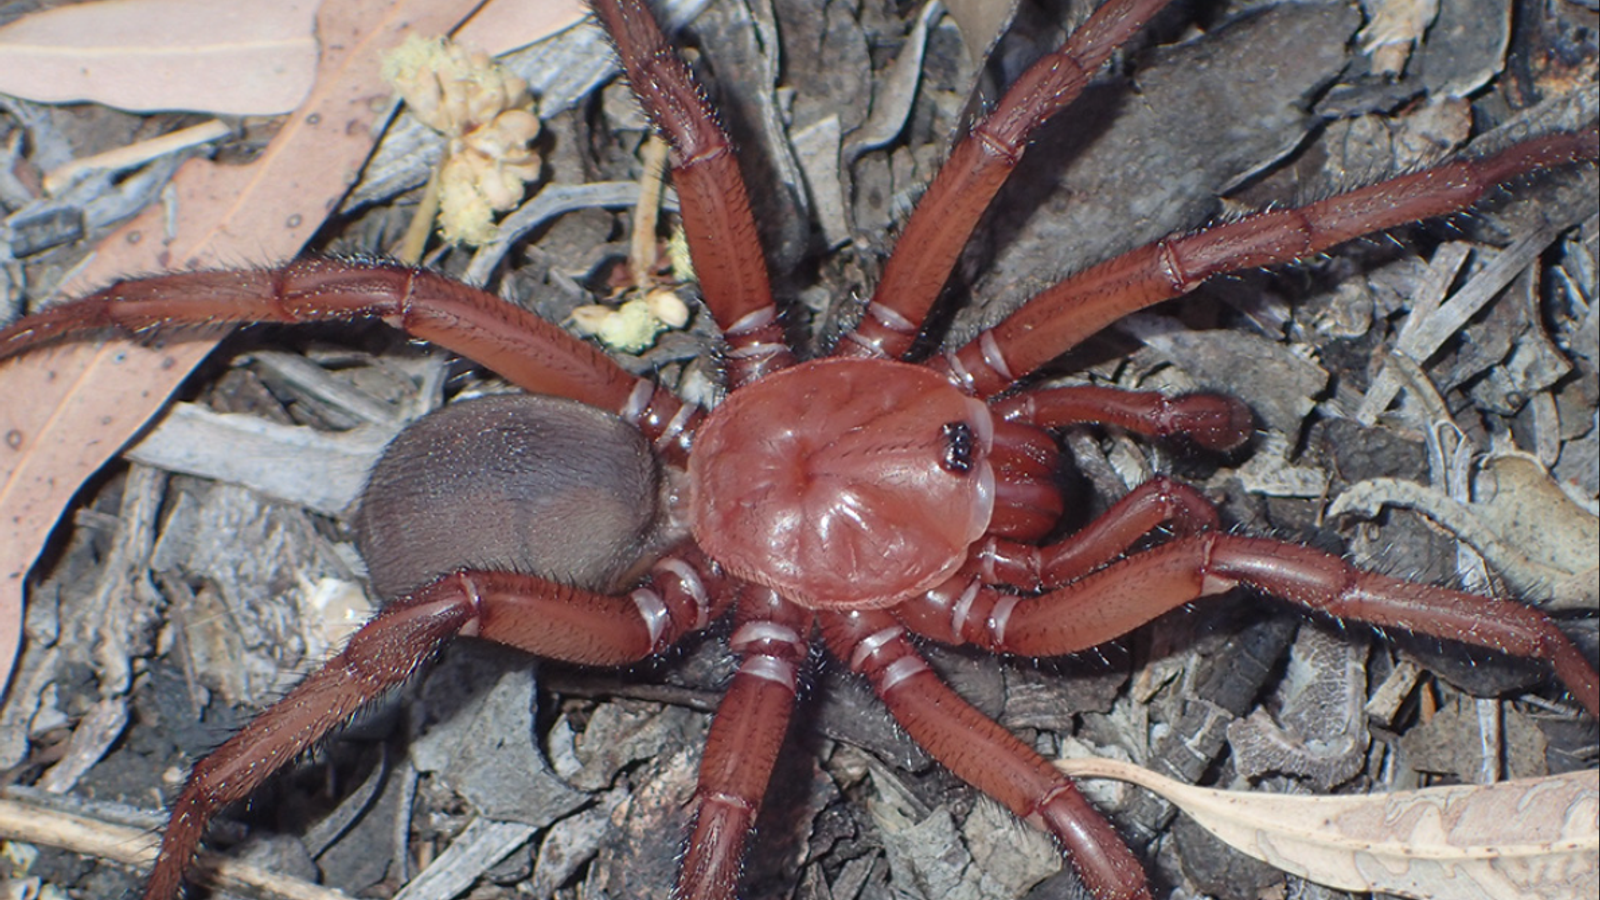 New giant trapdoor spider discovered in Australia – ‘it’s a big, beautiful species’ | Science & Tech News